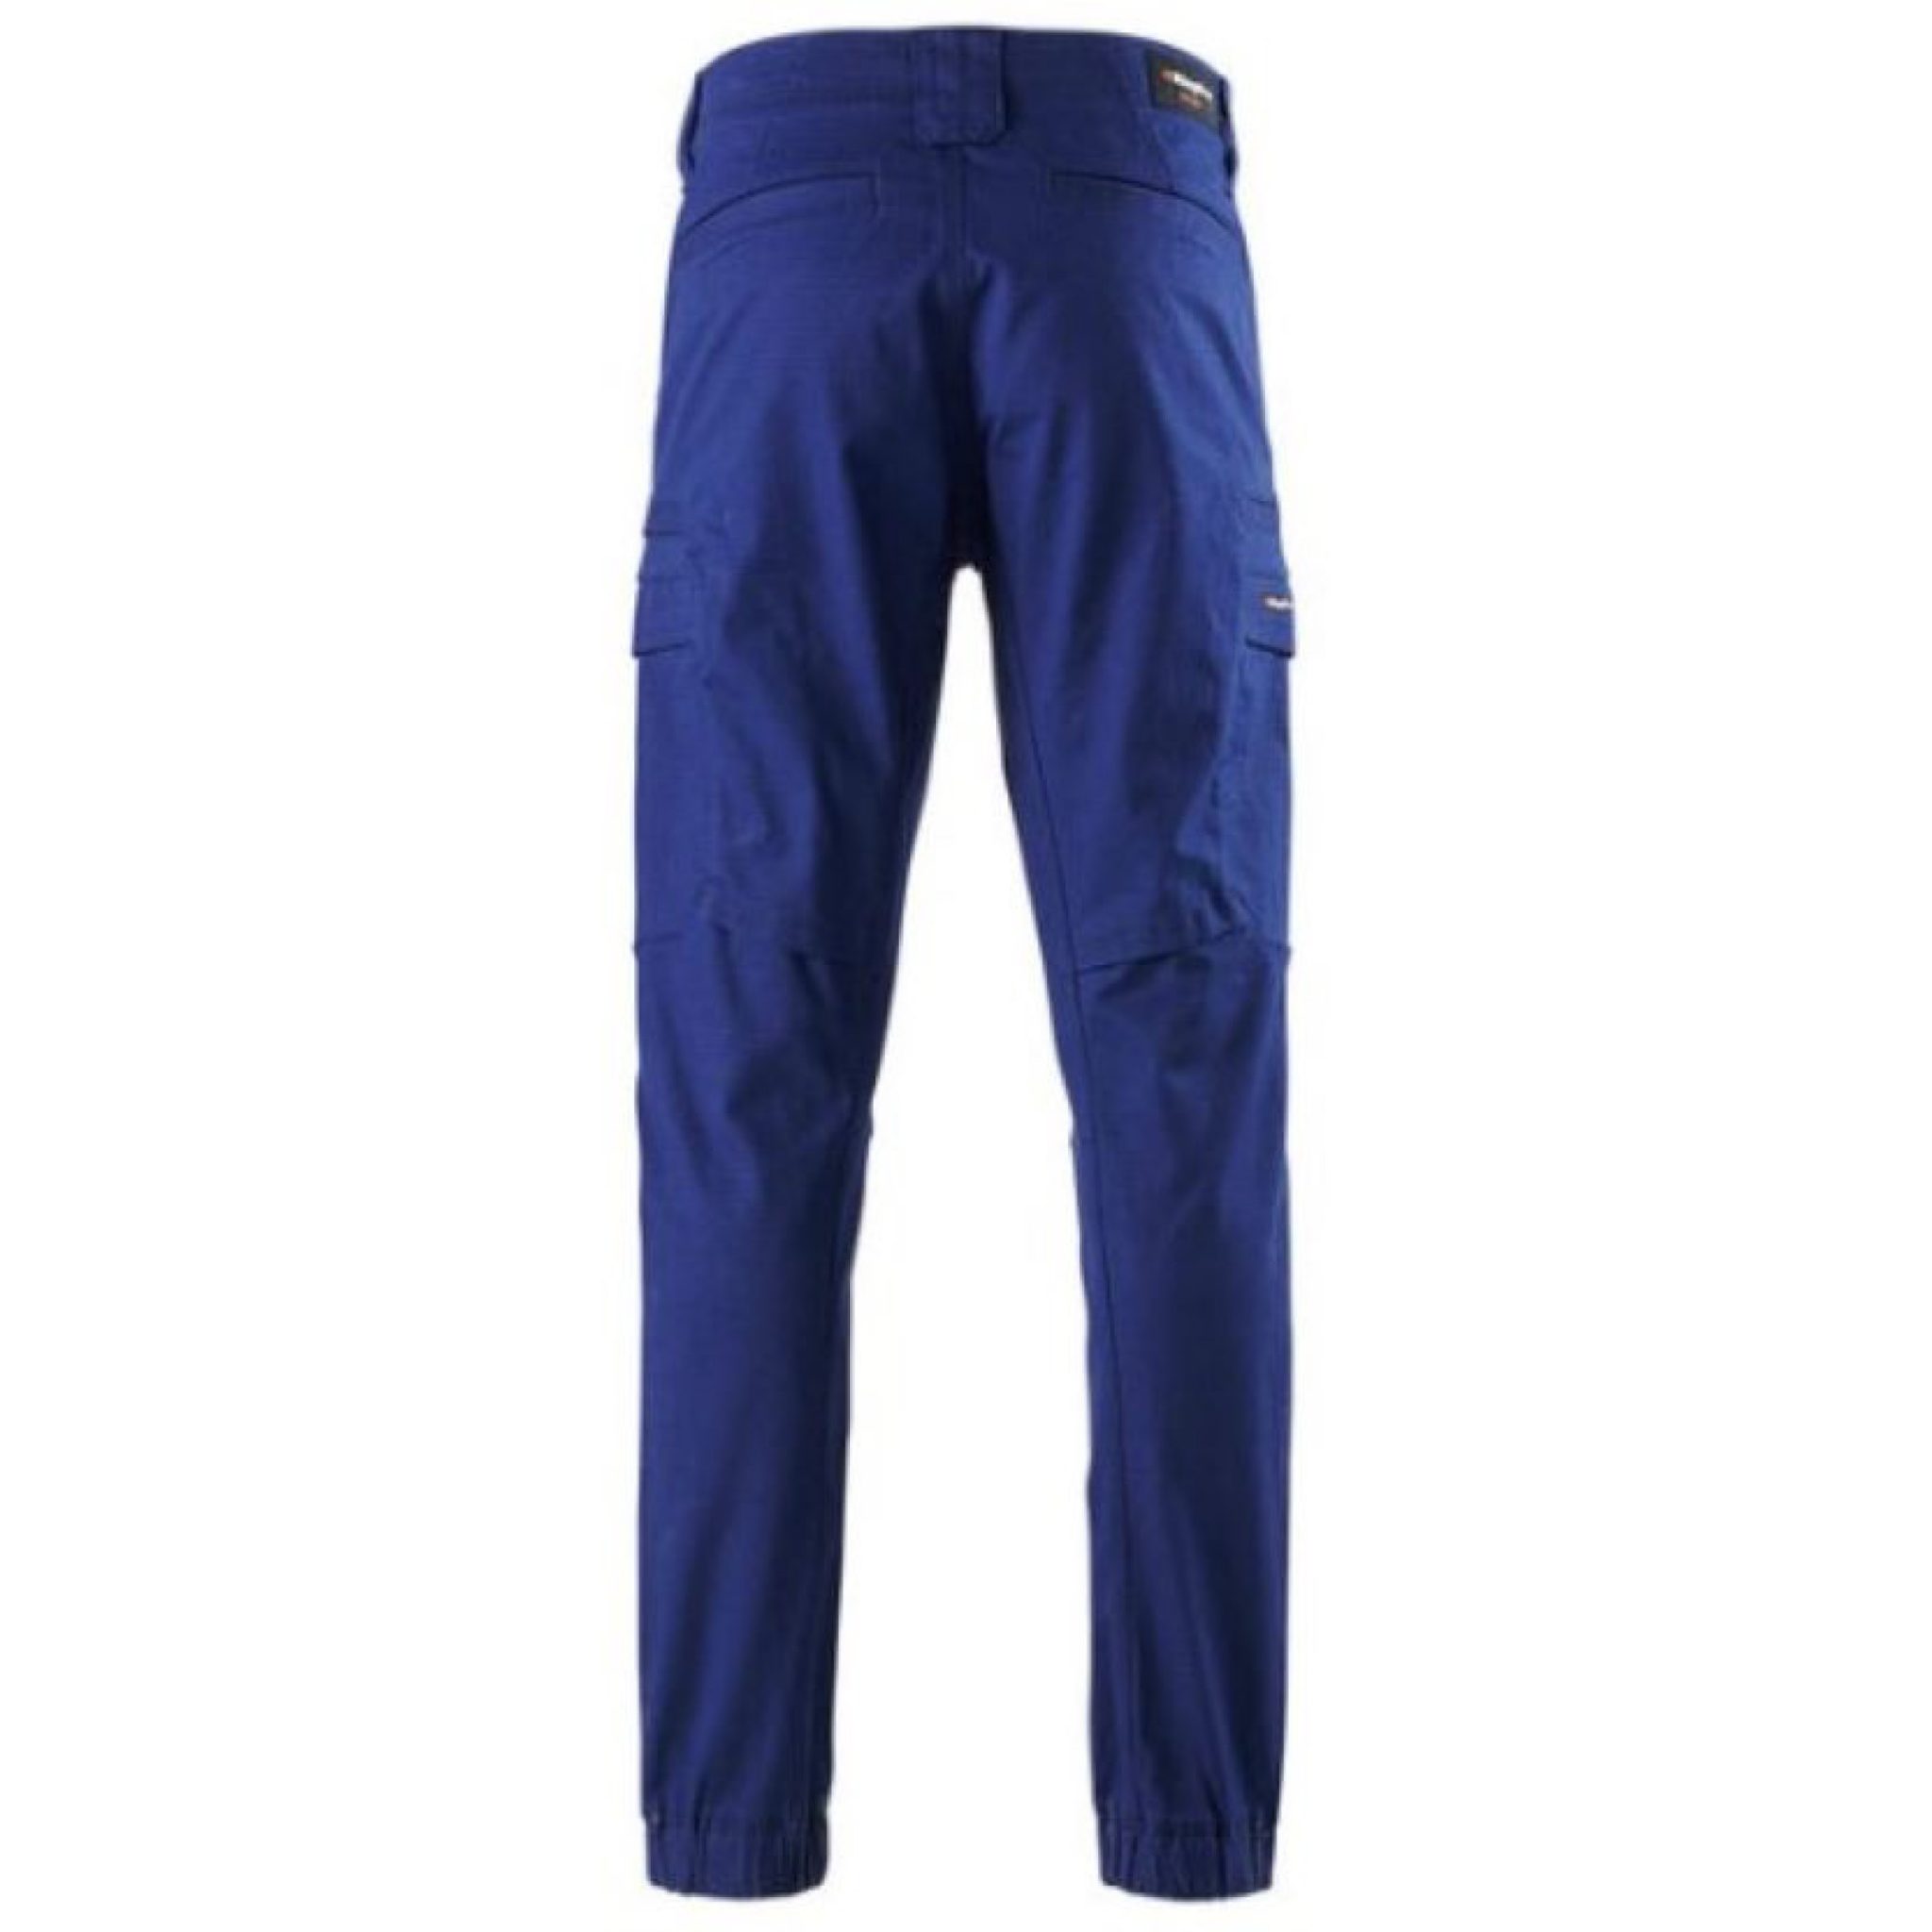 K13011 King Gee Work Cool Pro Cuff Pants - Max Global Products